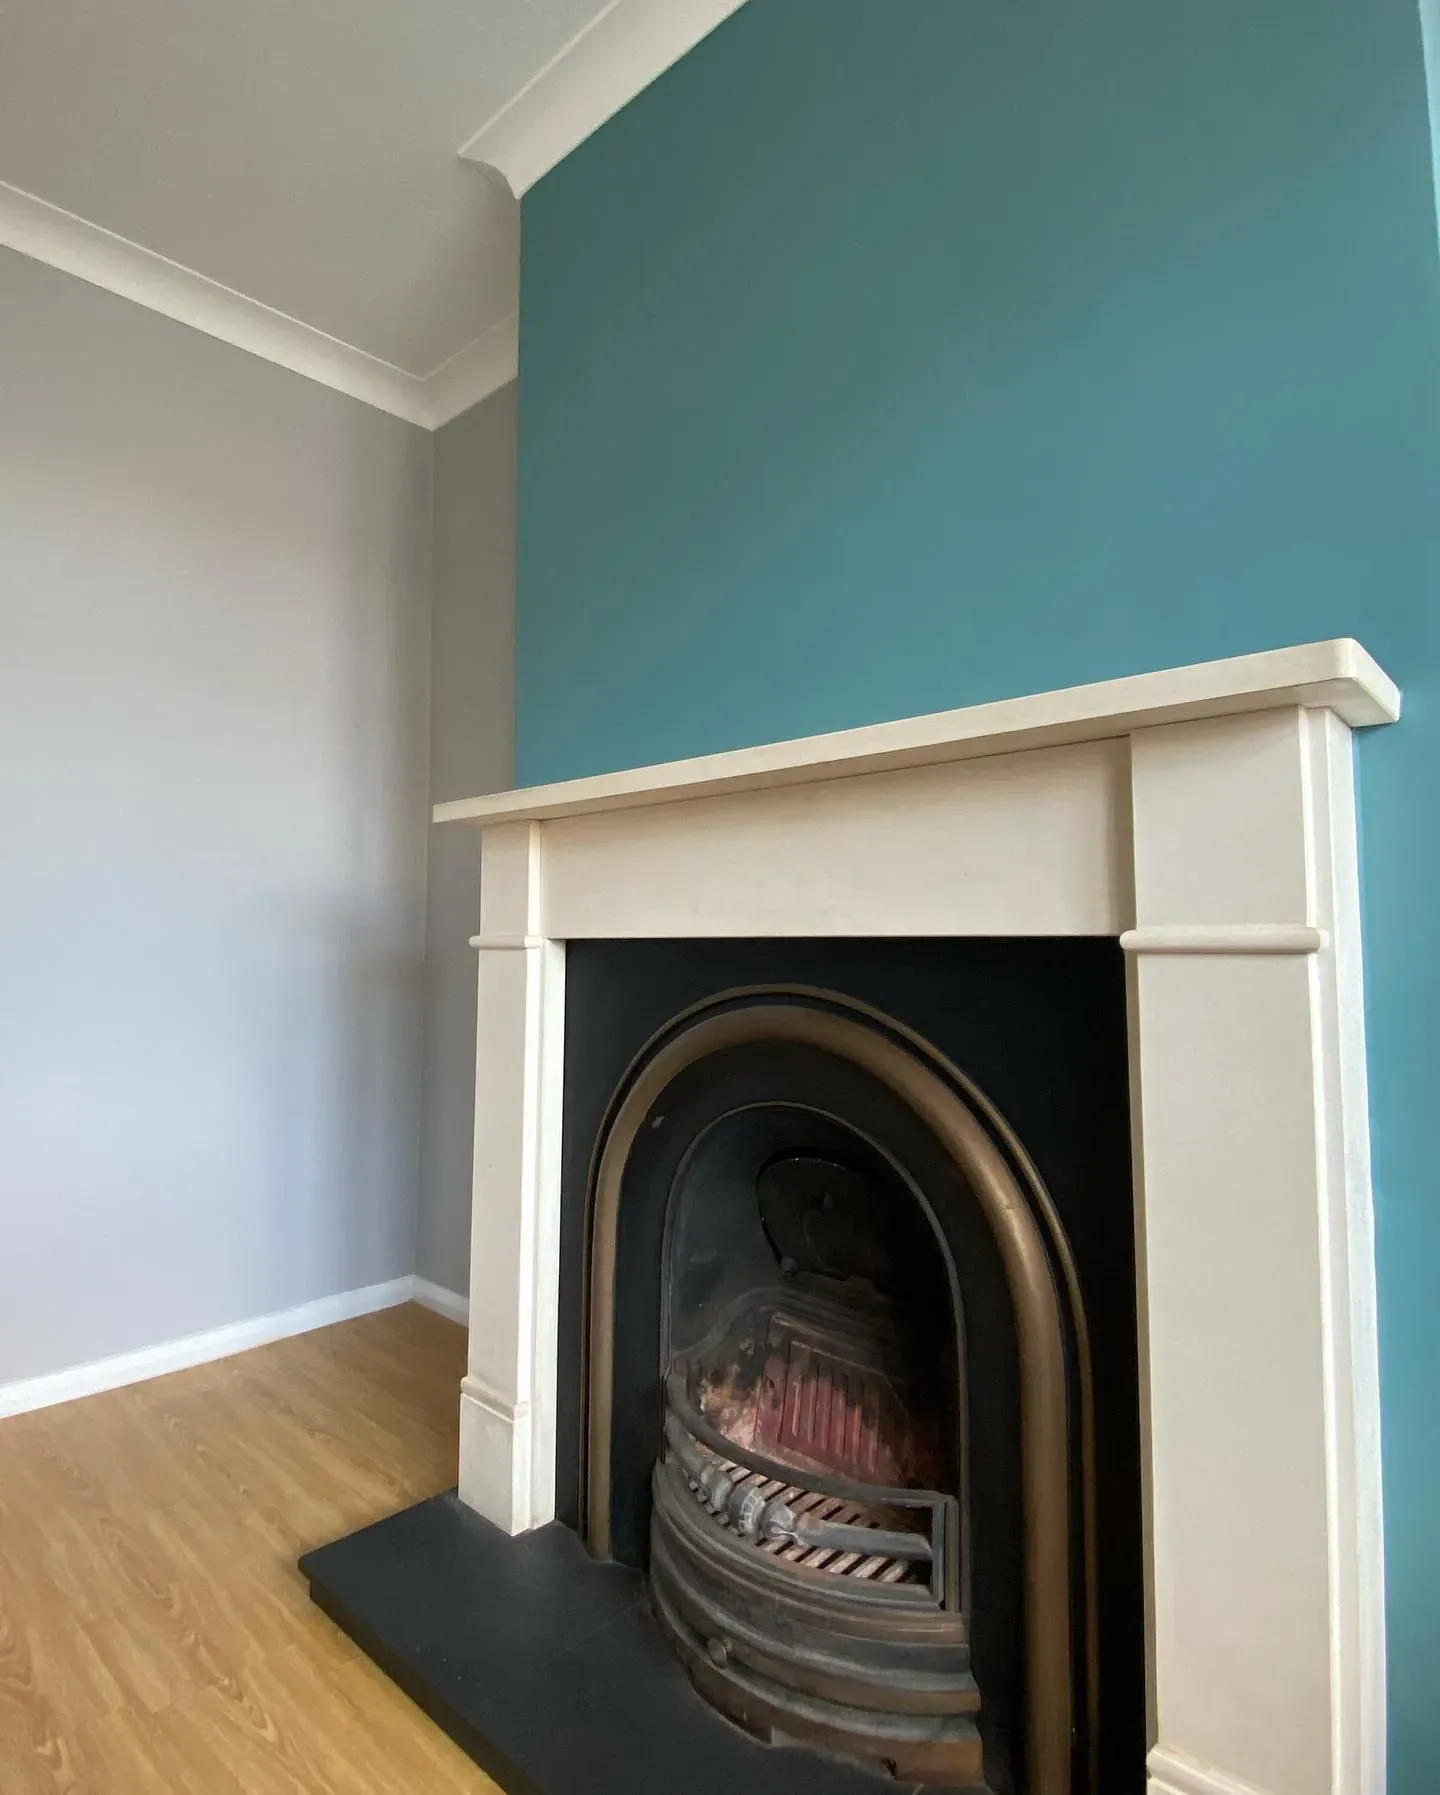 Dulux Maritime Teal victorian living room fireplace paint